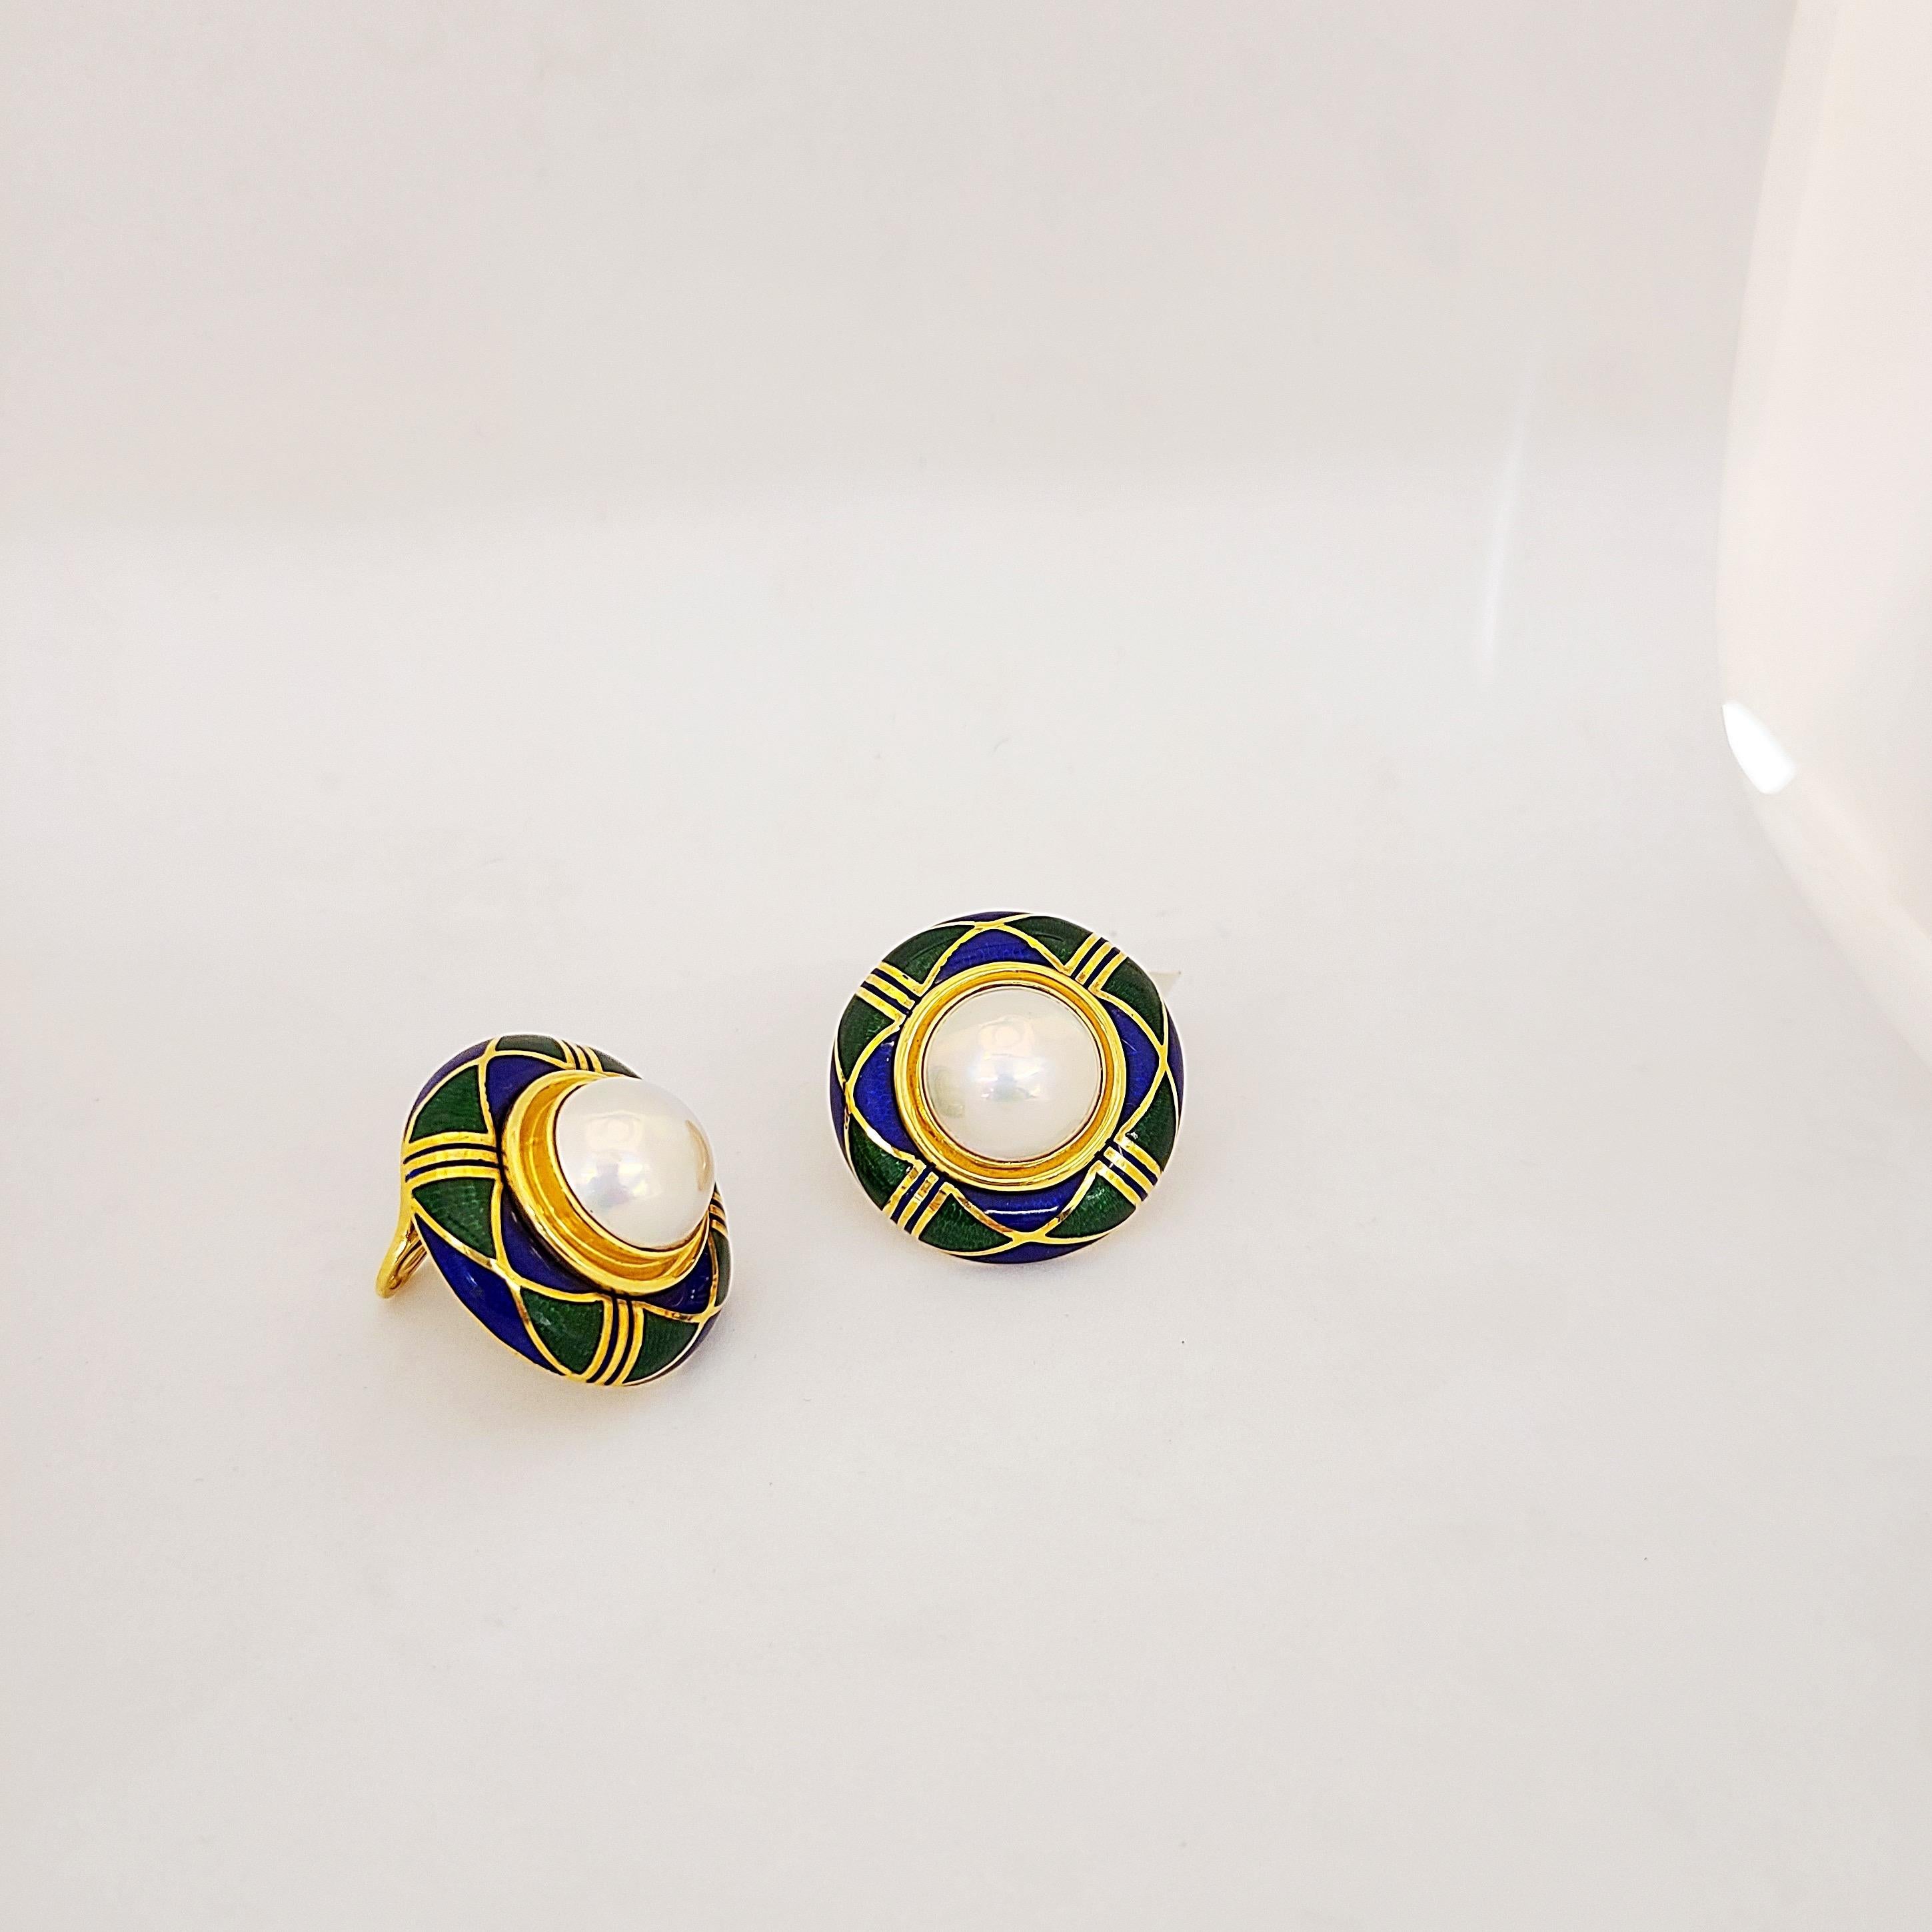 18 karat yellow gold earclips with blue and green enamel and mabe pearl centers. The earrings measure 1.25